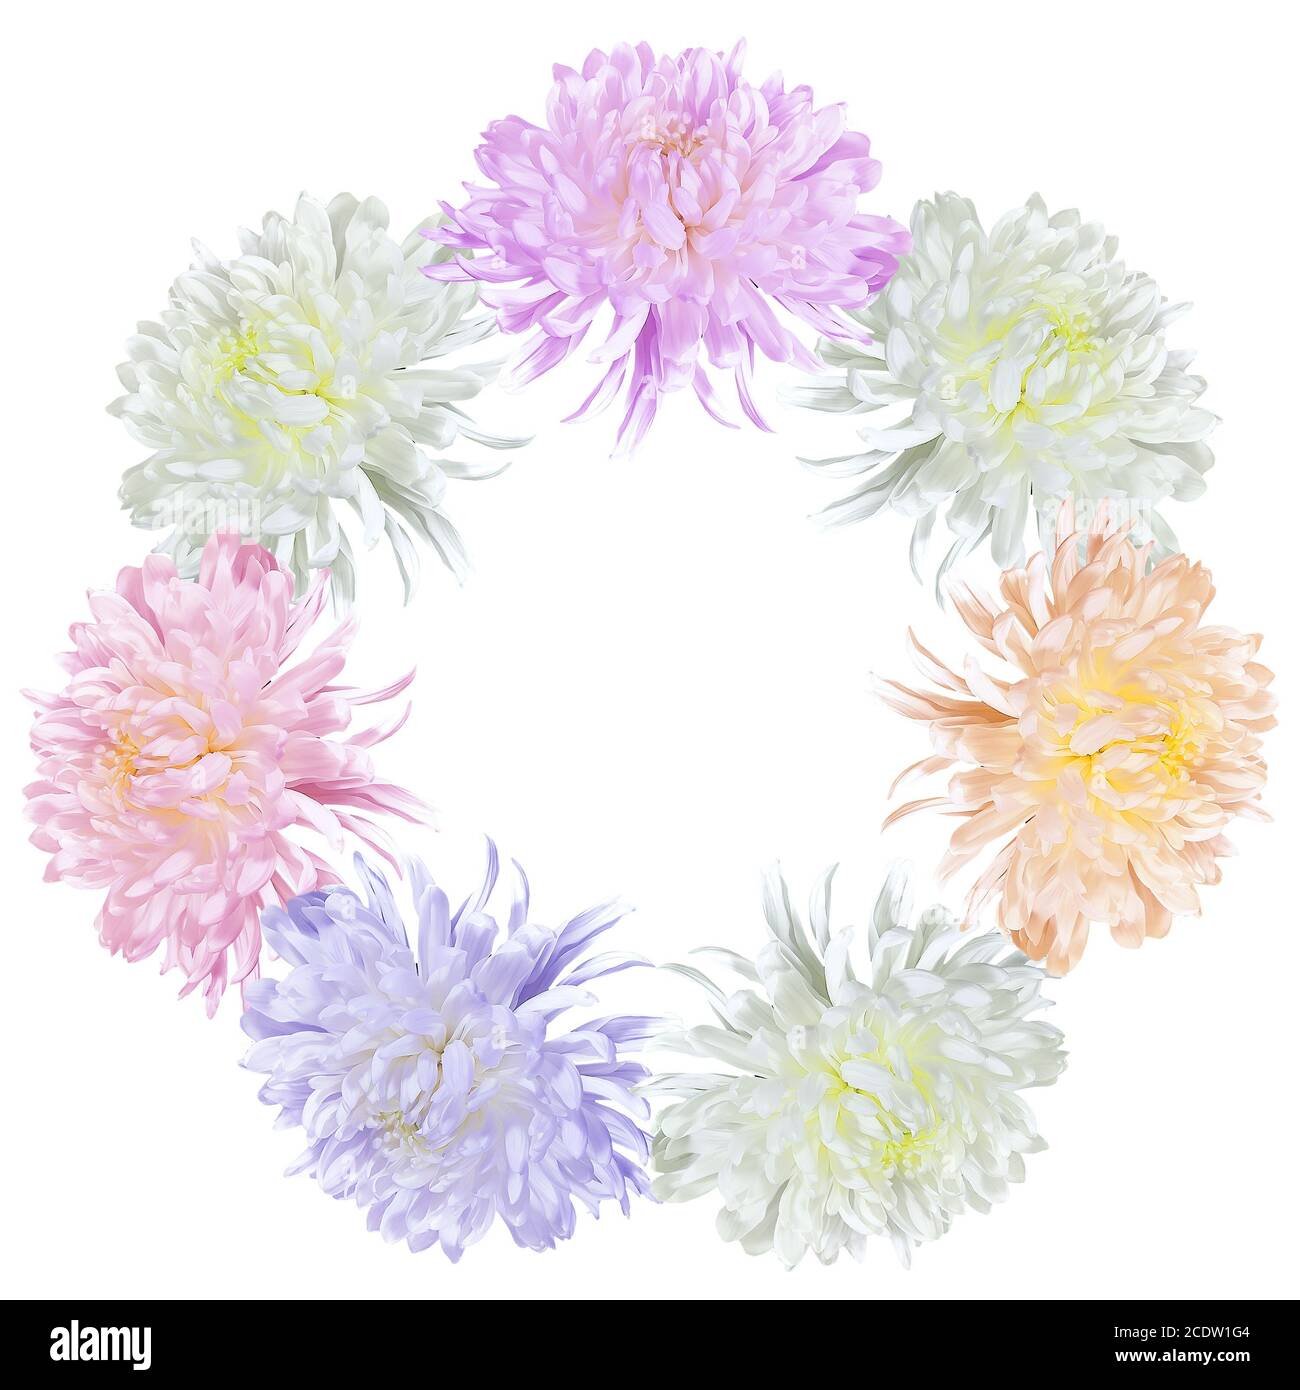 Floral round frame with colorful chrysanthemums on white background Stock Photo